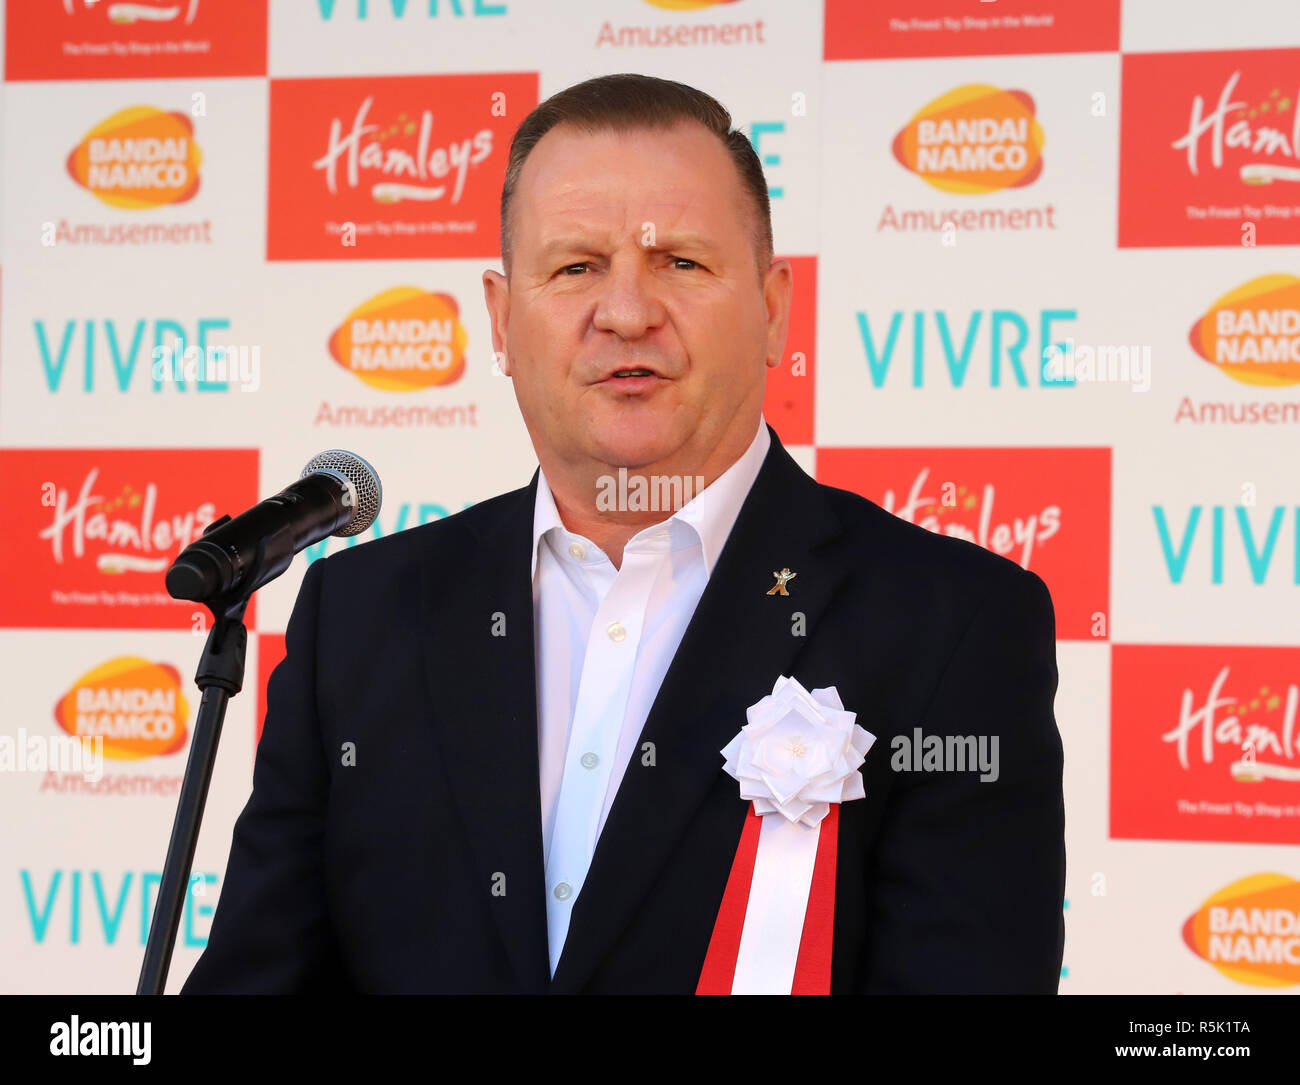 Friday. 30th Nov, 2018. November 30 2018, Yokohama, Japan - British toy store chain Hamleys CEO Ralph Cunningham delivers a speech for the opening of Hamleys' first shop in Japan in Yokohama, suburban Tokyo on Friday, November 30, 2018. London's largest and oldest toy store Hamleys opened a 3,000 square meters large shop in Yokohama's shopping mall World Porters. Credit: Yoshio Tsunoda/AFLO/Alamy Live News Stock Photo